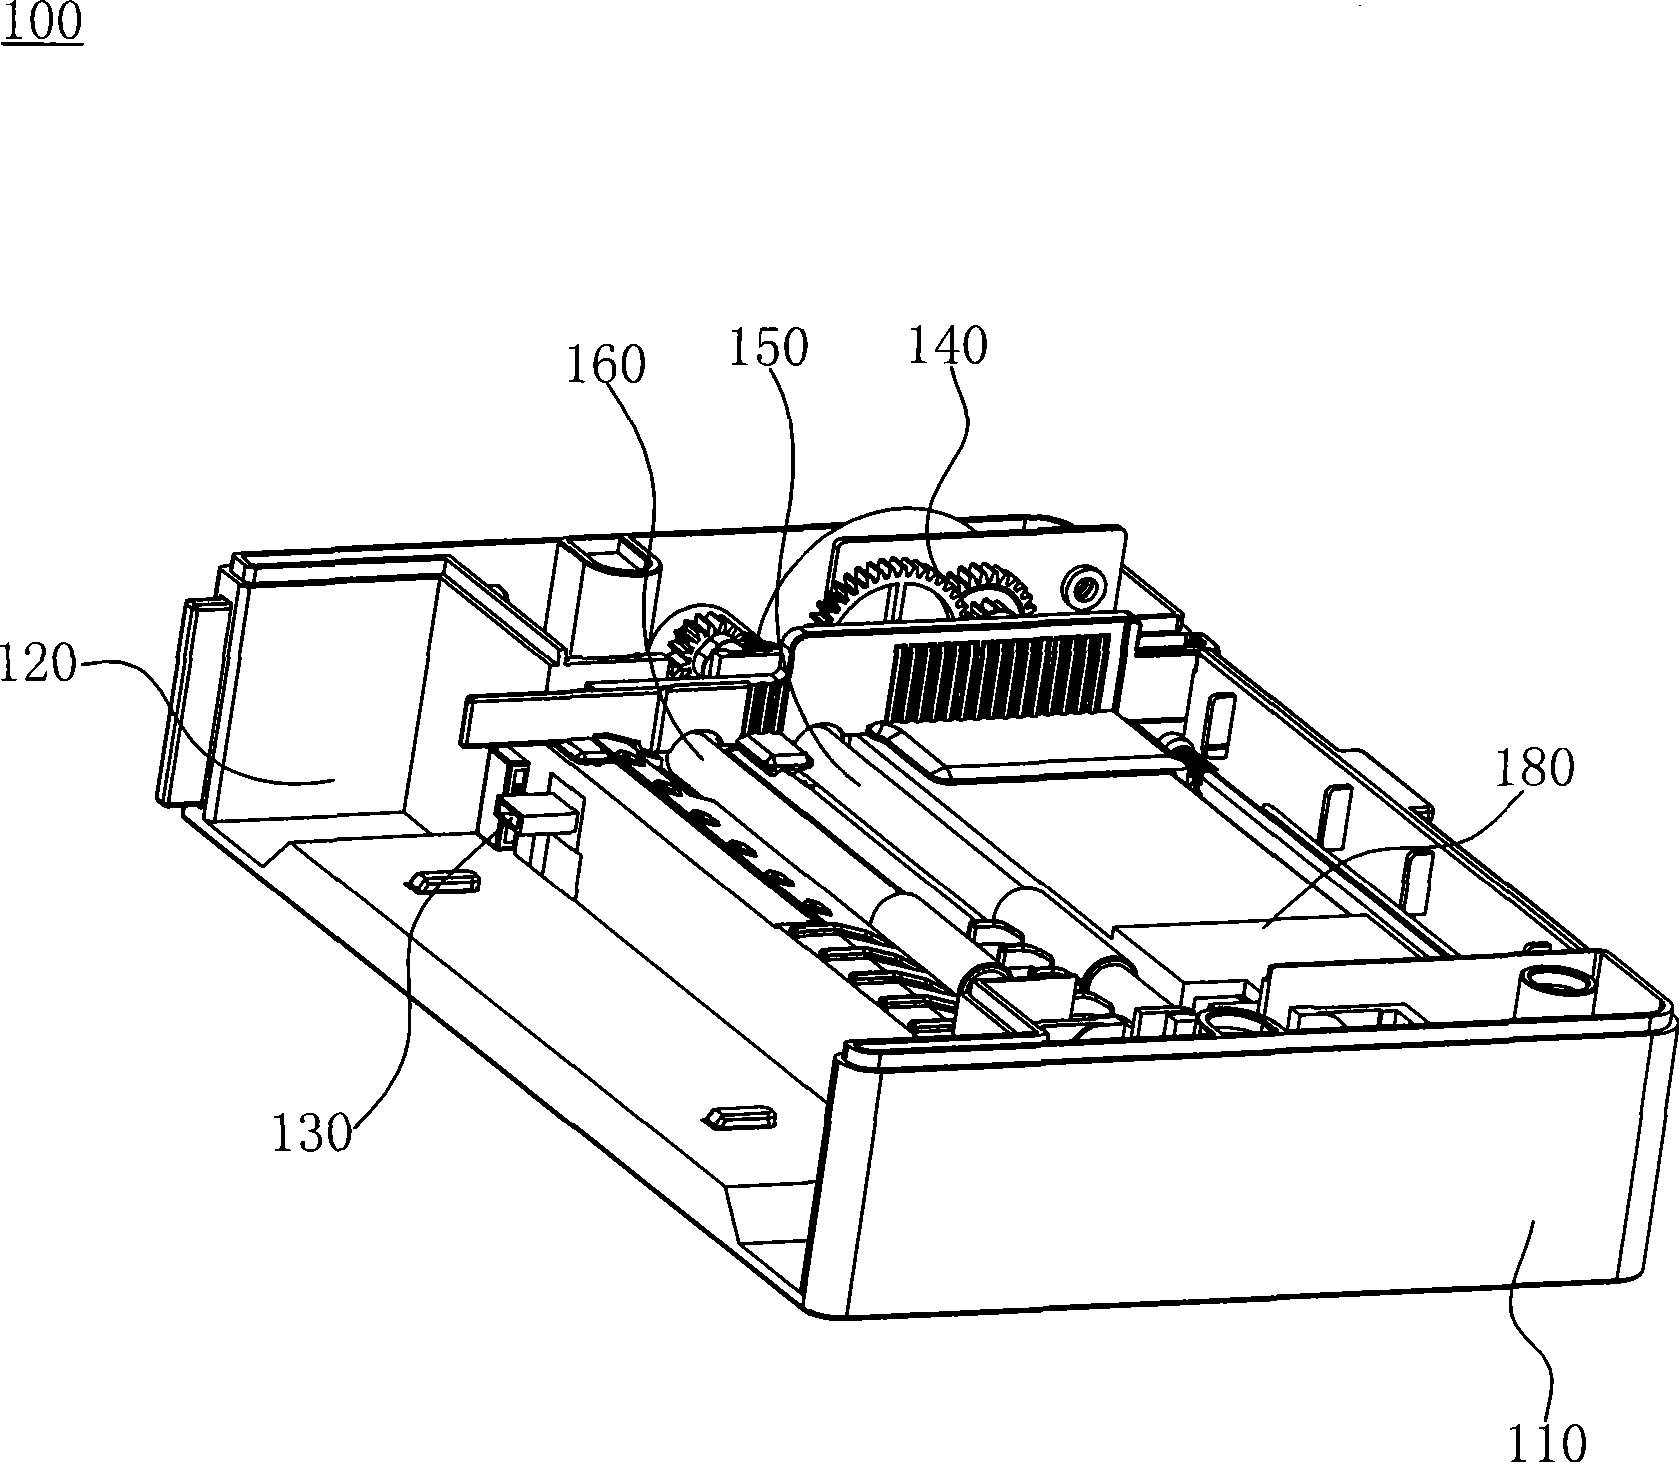 Continuous paper feed scanning method and continuous paper feed device